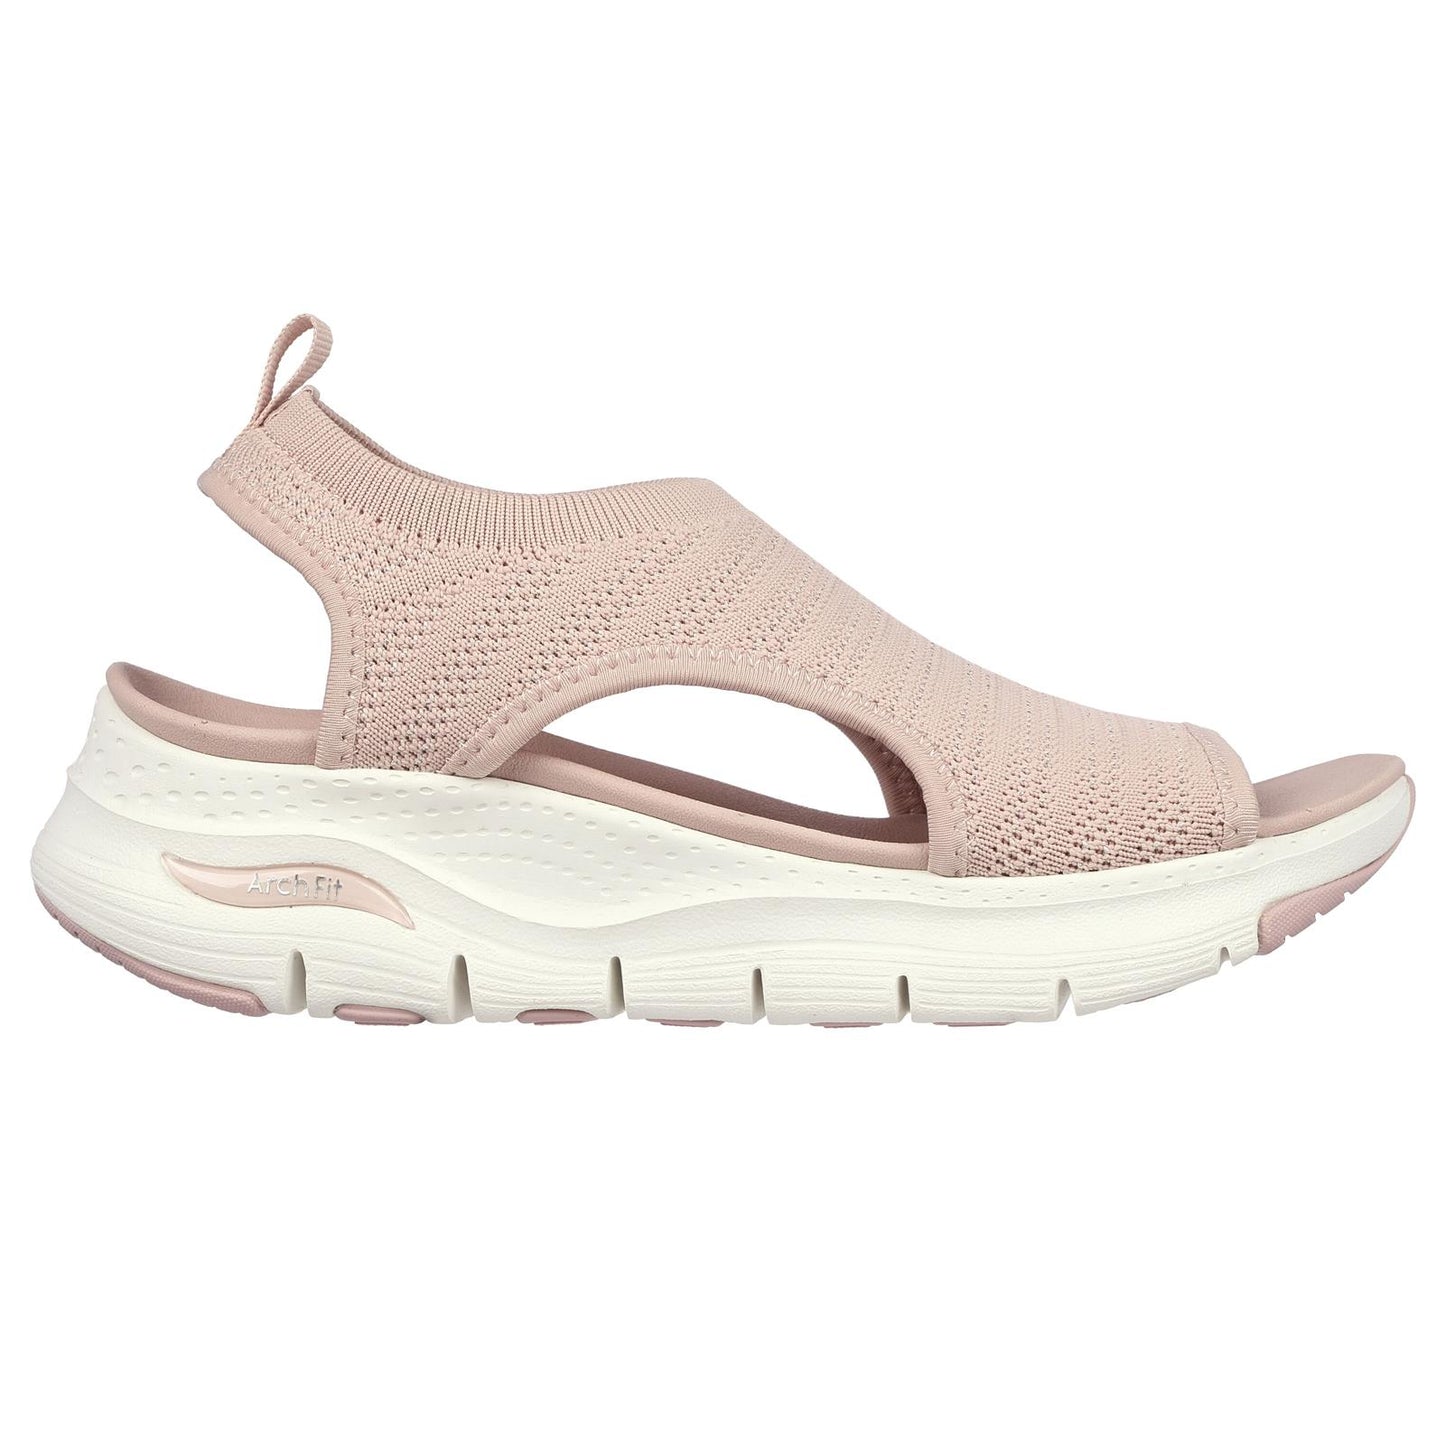 Skechers Womens Arch Fit Darling Days Pink Blush Knitted Vegan Sandals